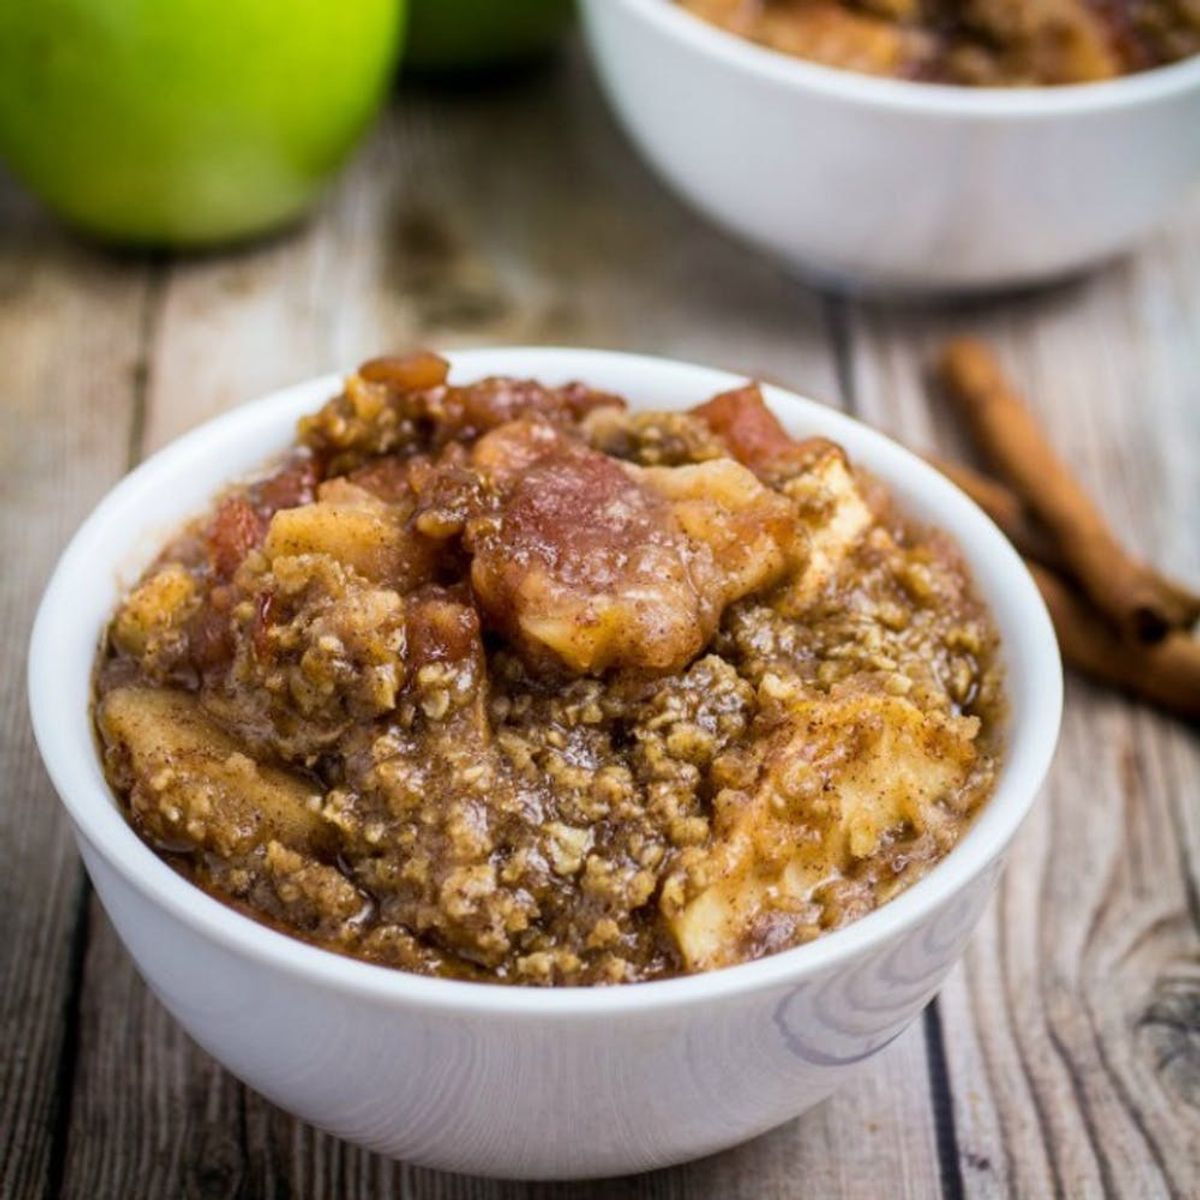 16 Slow Cooker Apple Recipes That Will Make Your Home Smell Amazing